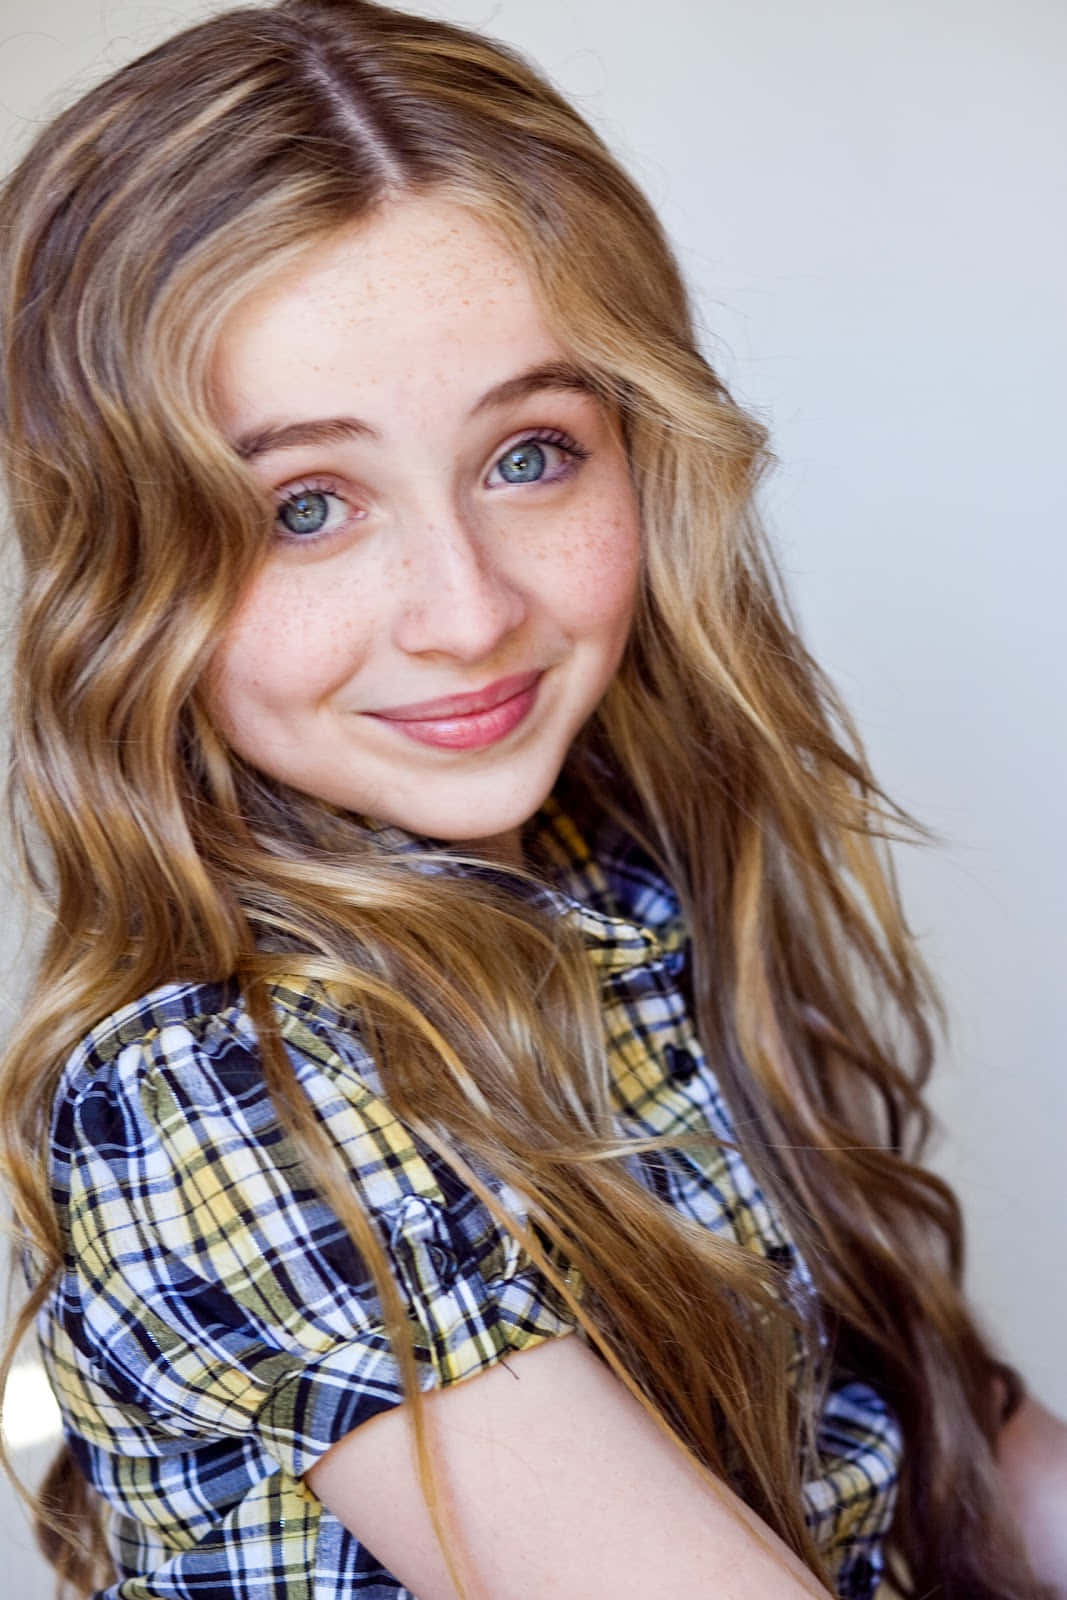 Smiling Young Girlwith Blue Eyes Wallpaper